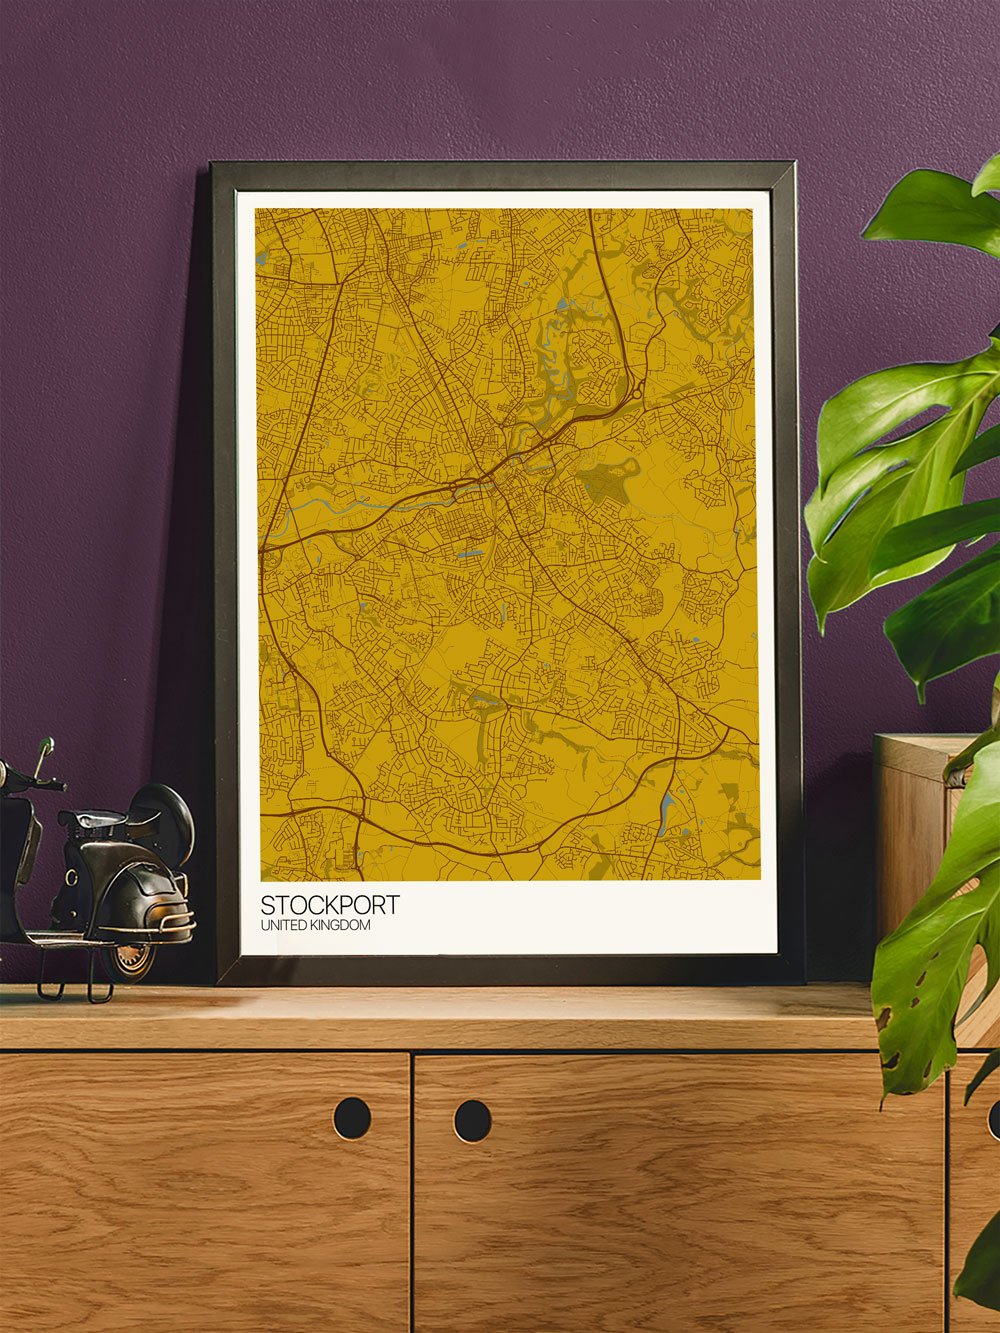 Stockport City Map Wall Art in stylish room interior